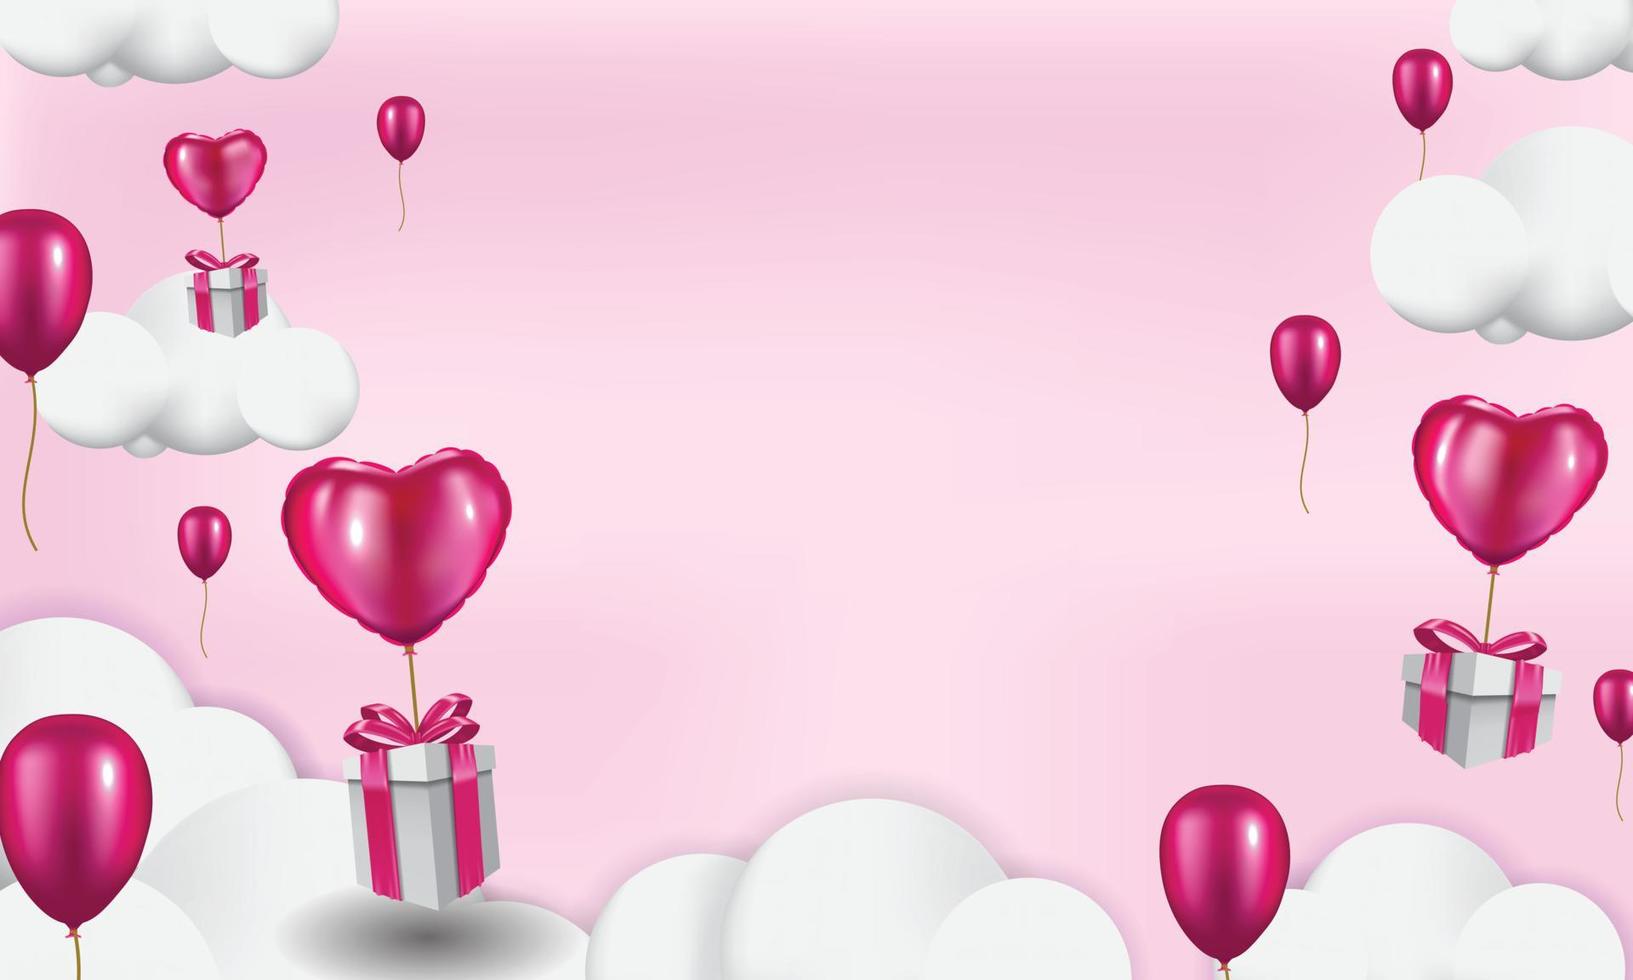 Gift boxes with heart balloon floating it the sky, Valentine's Day background tempplate, 3d realistic style vector